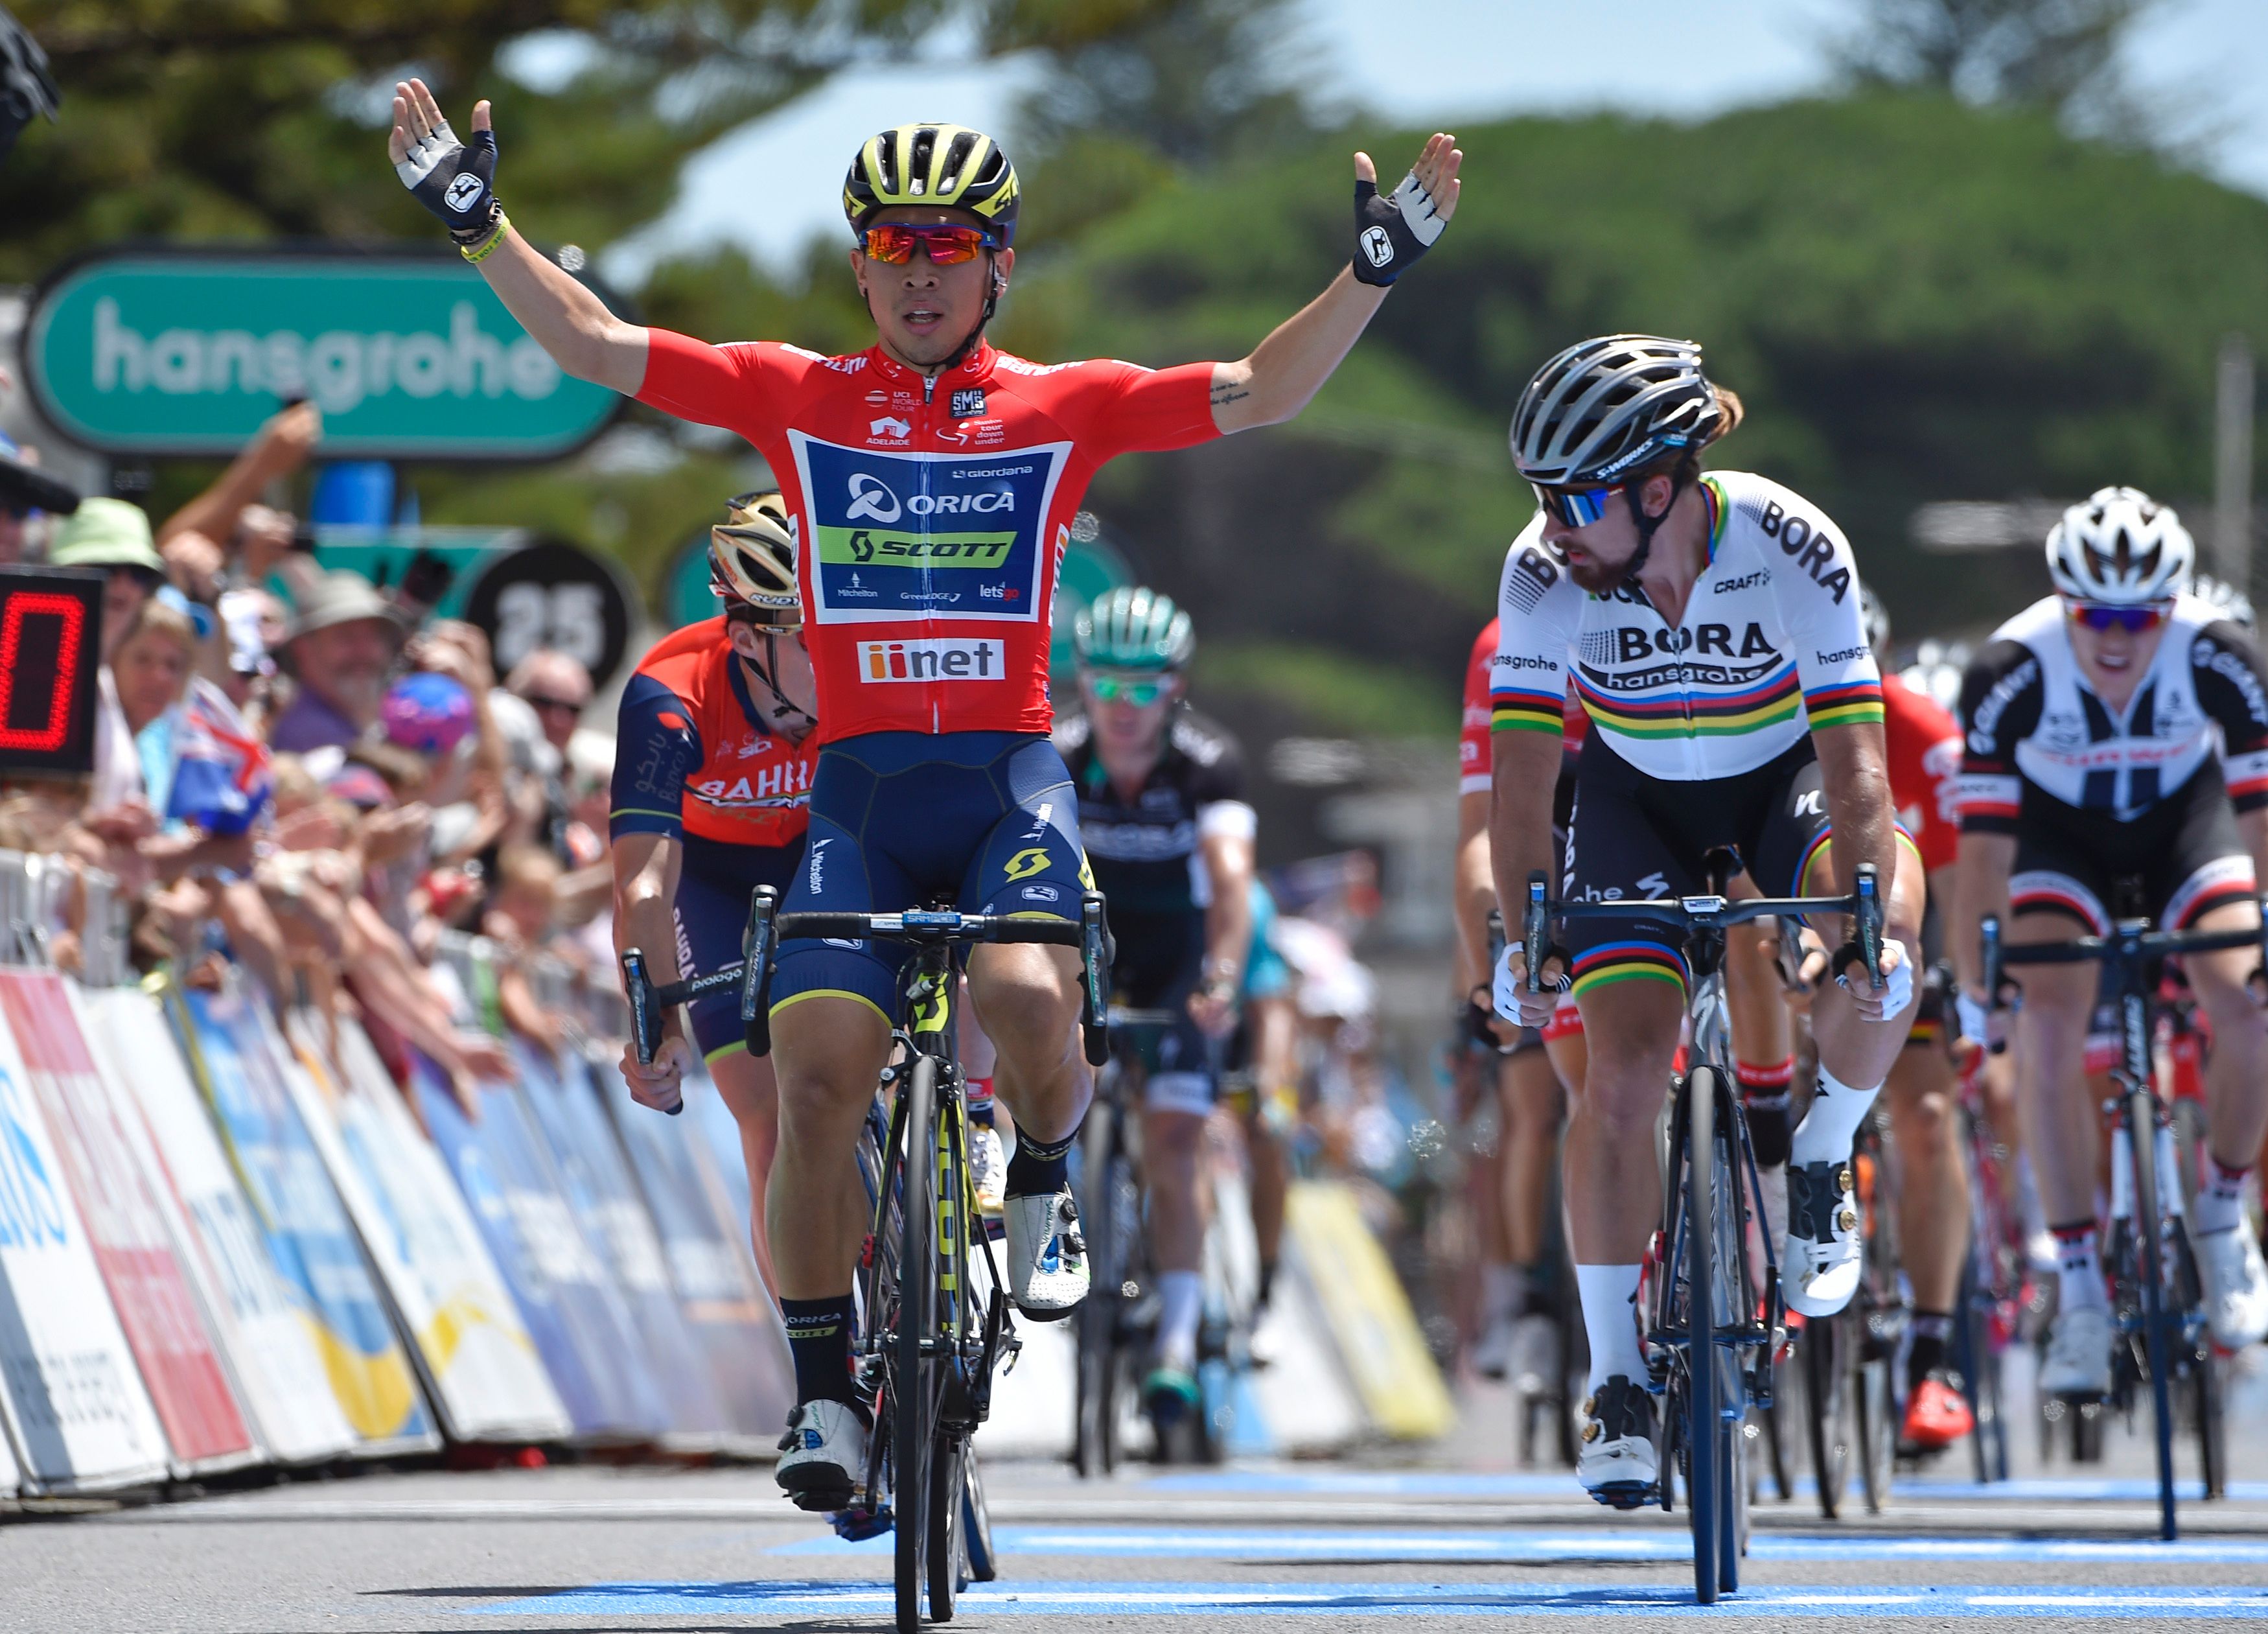 Cycling: Ewan sprints to second stage victory, Porte retains lead